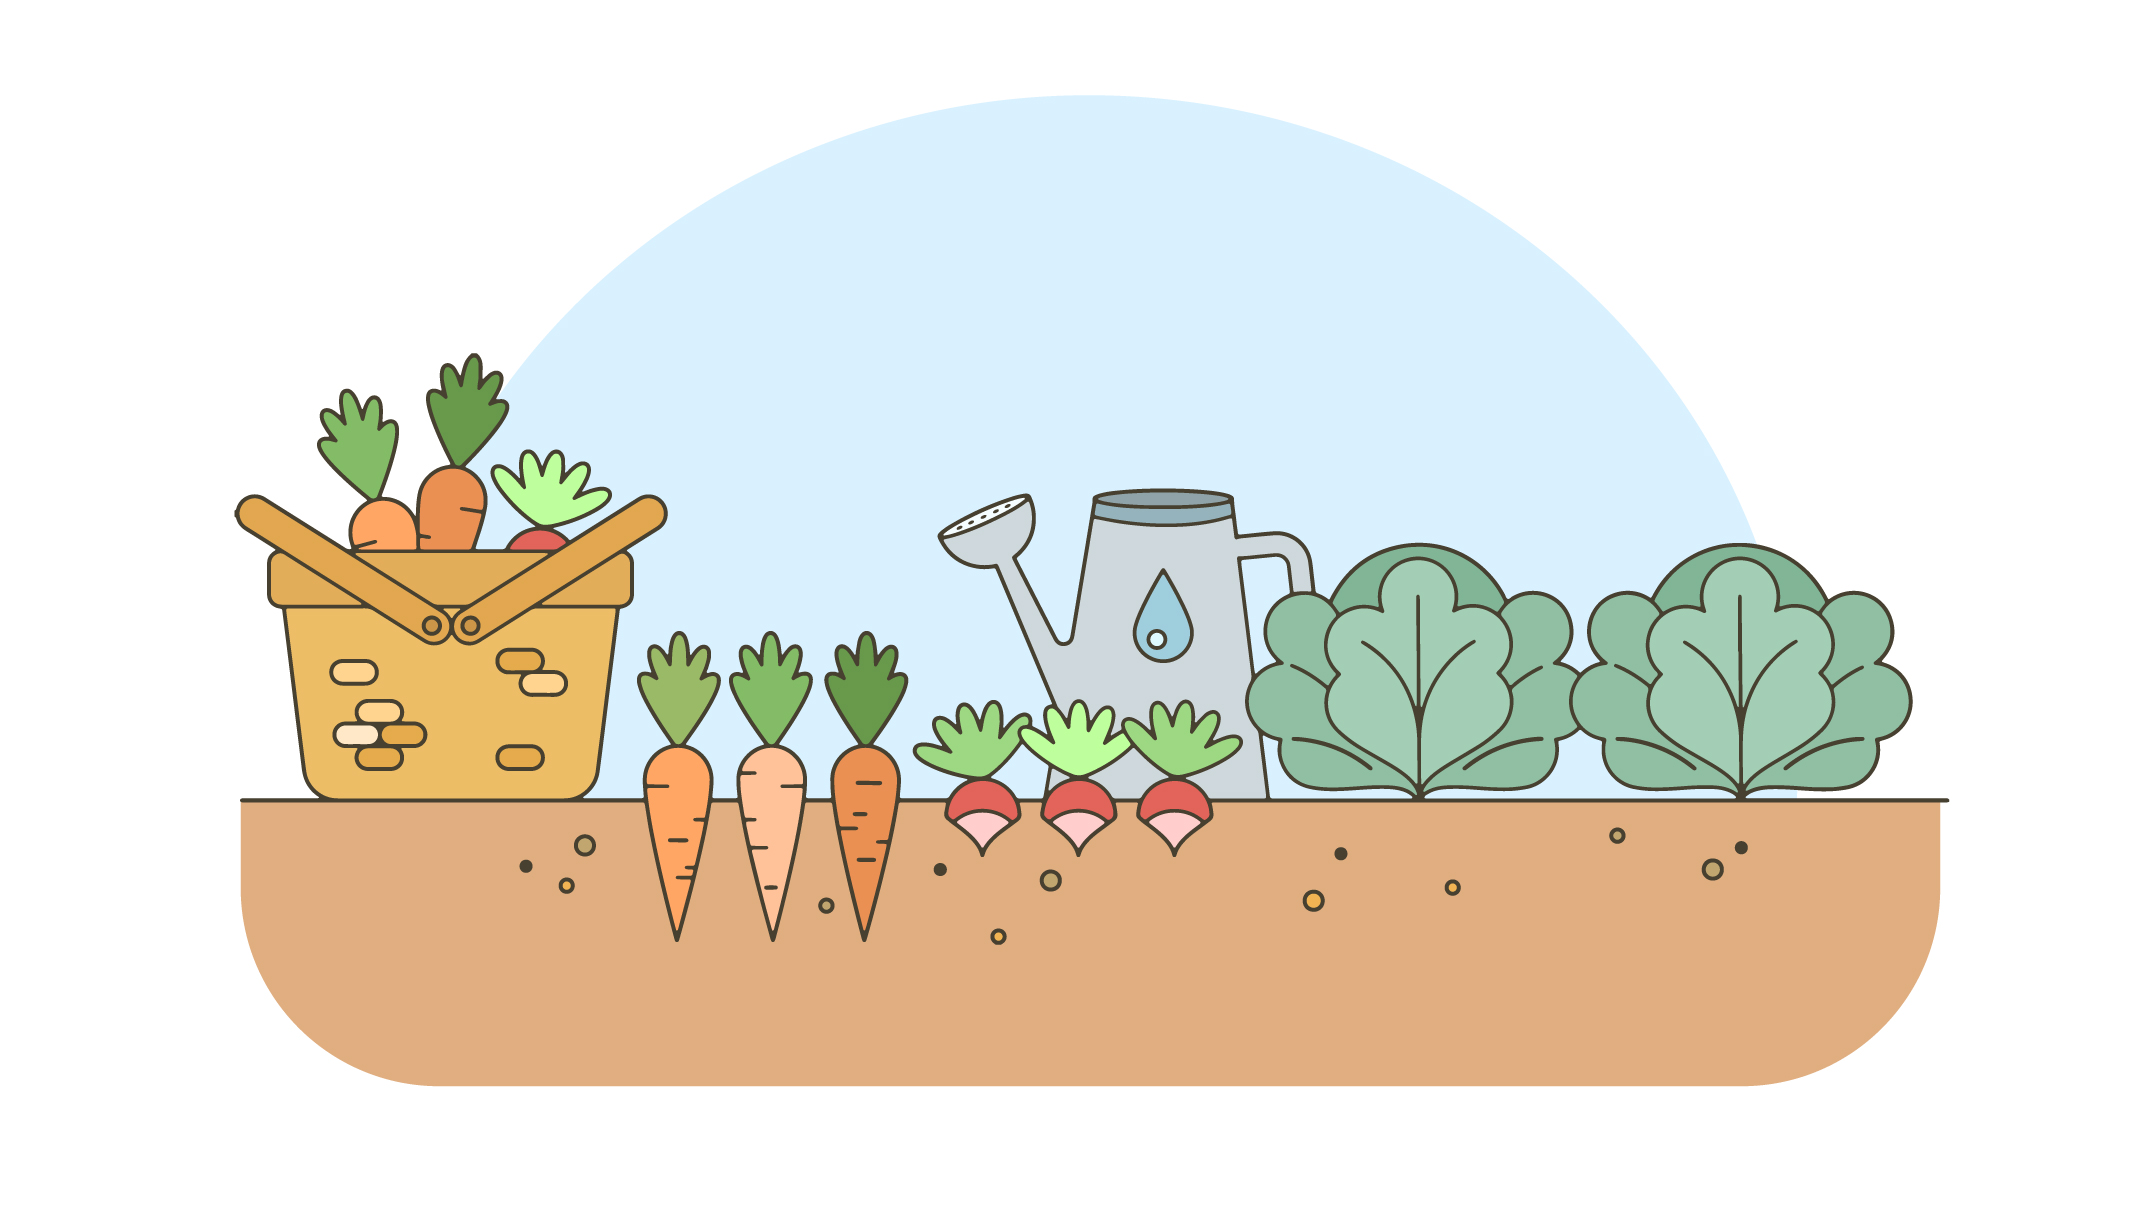 Graphic depicting vegetables growing